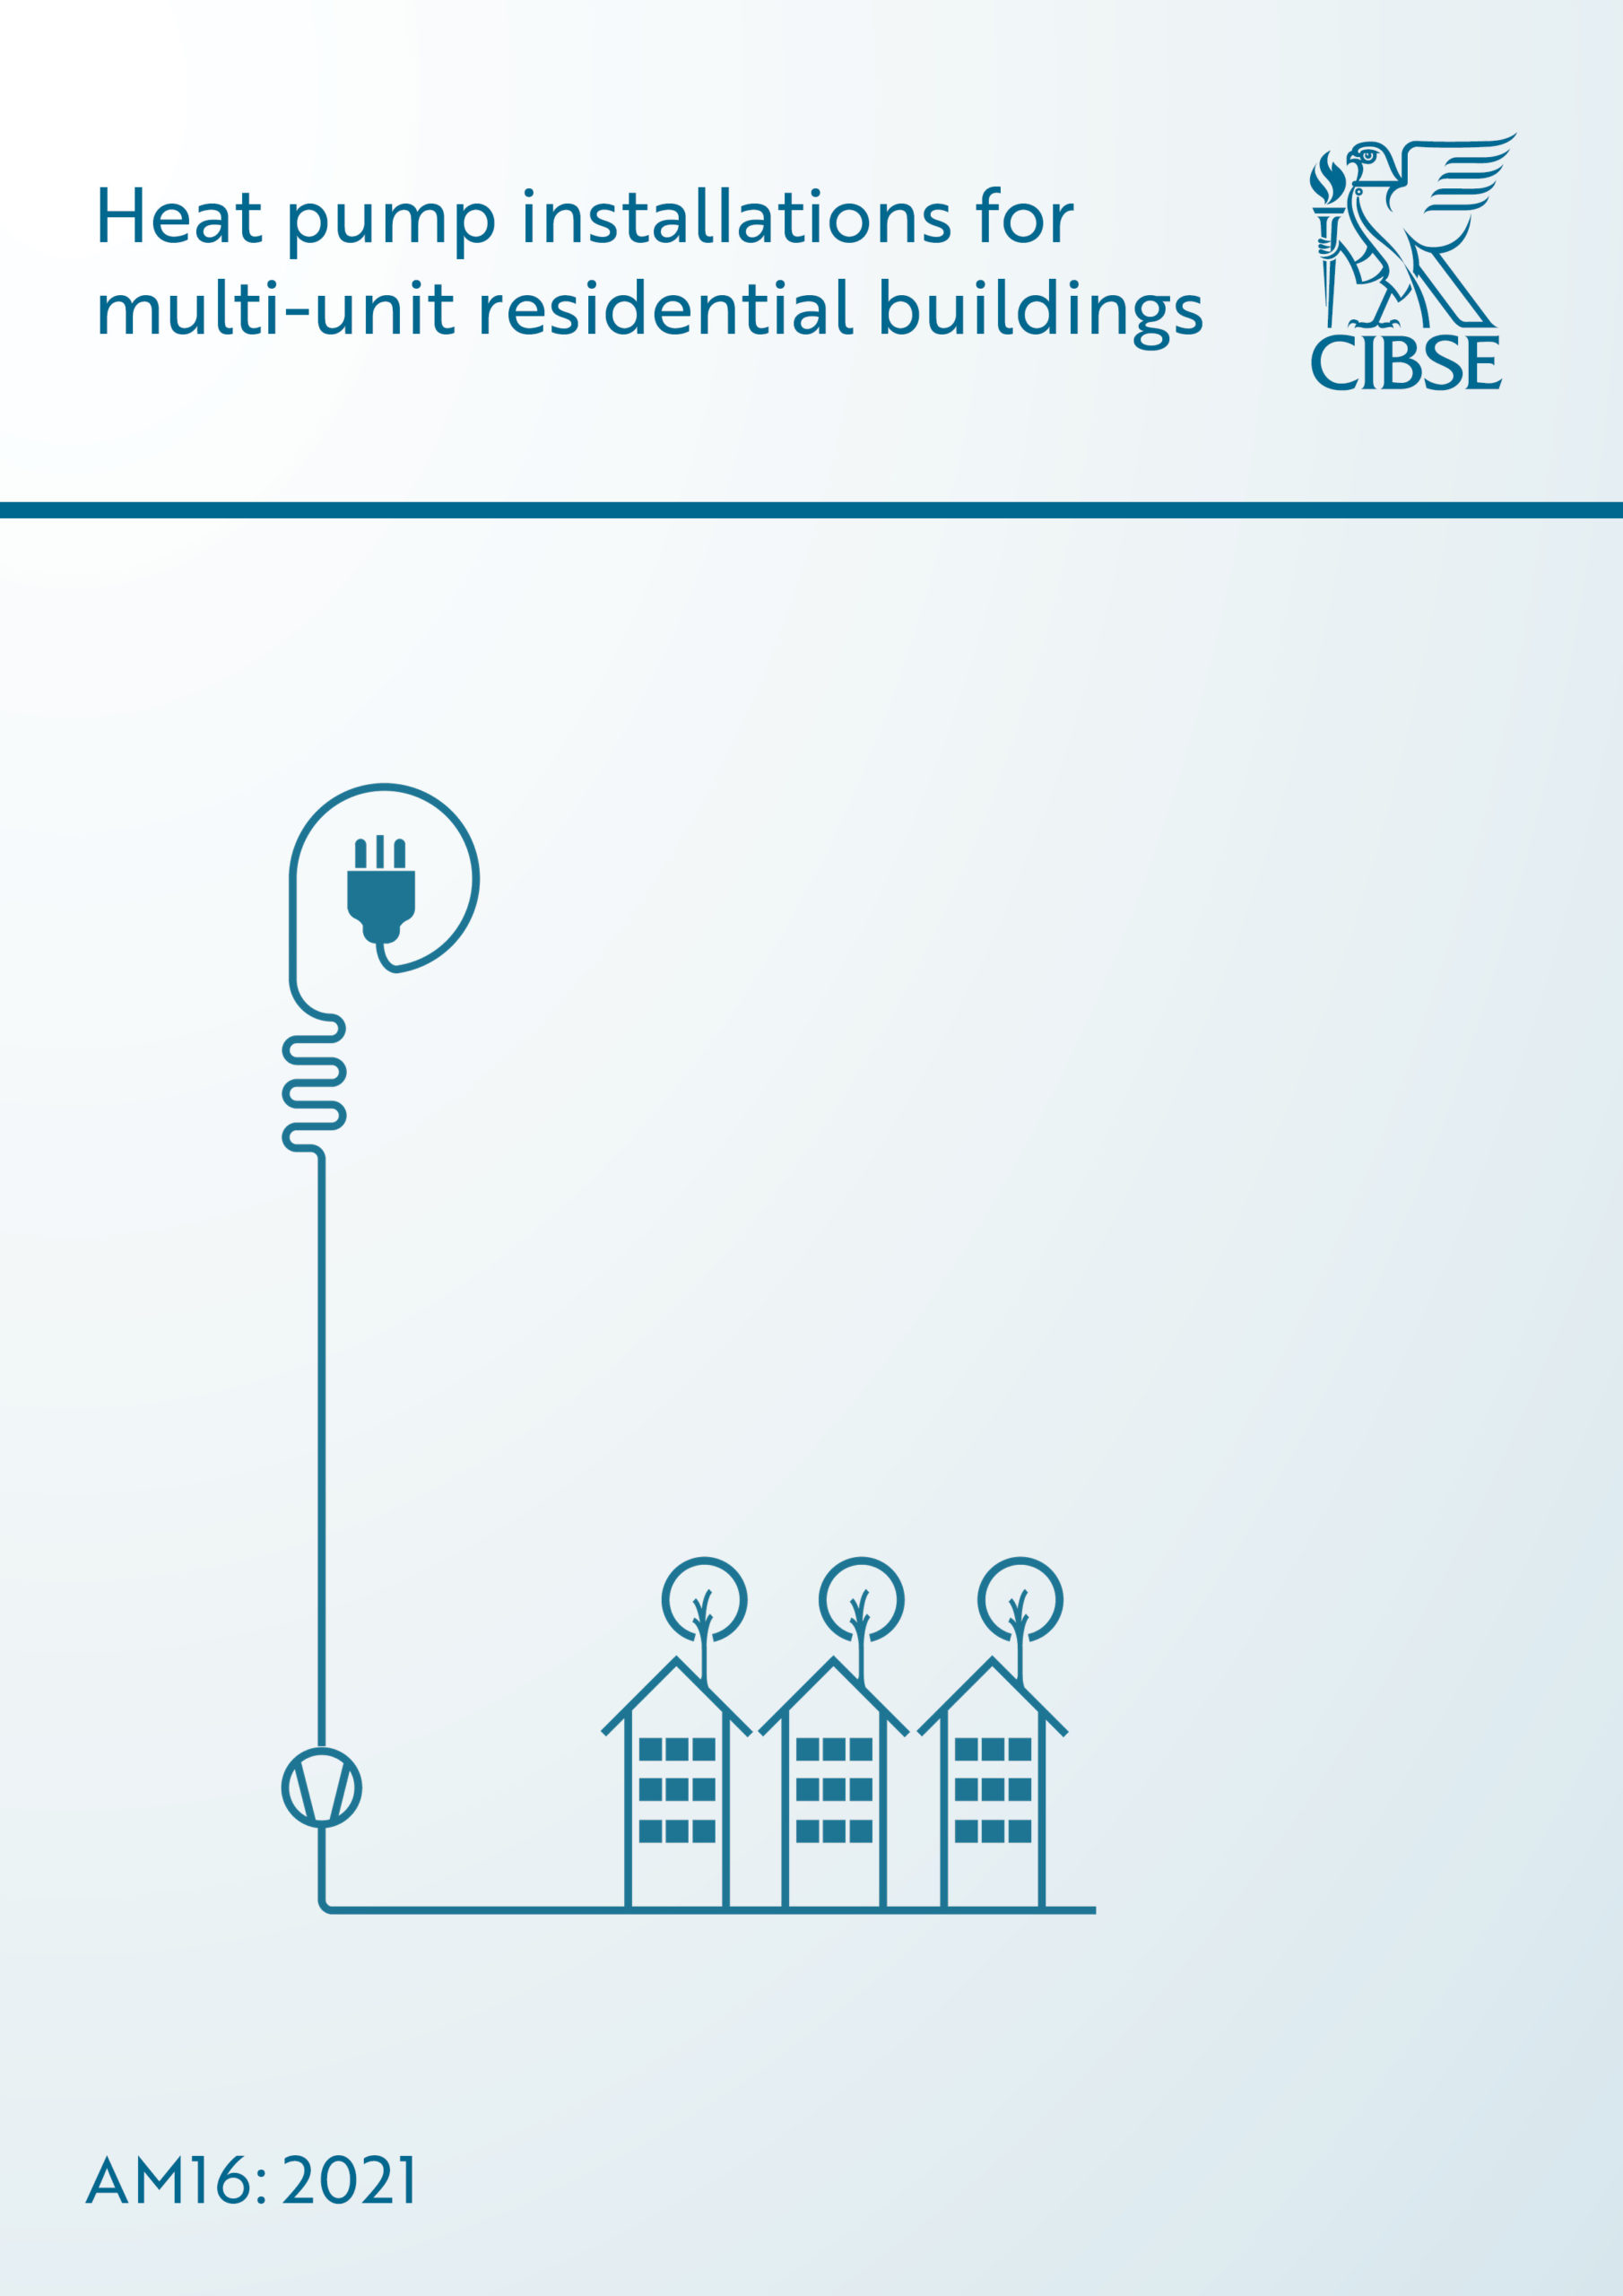 CIBSE launches design guidance for heat pumps in high density housing